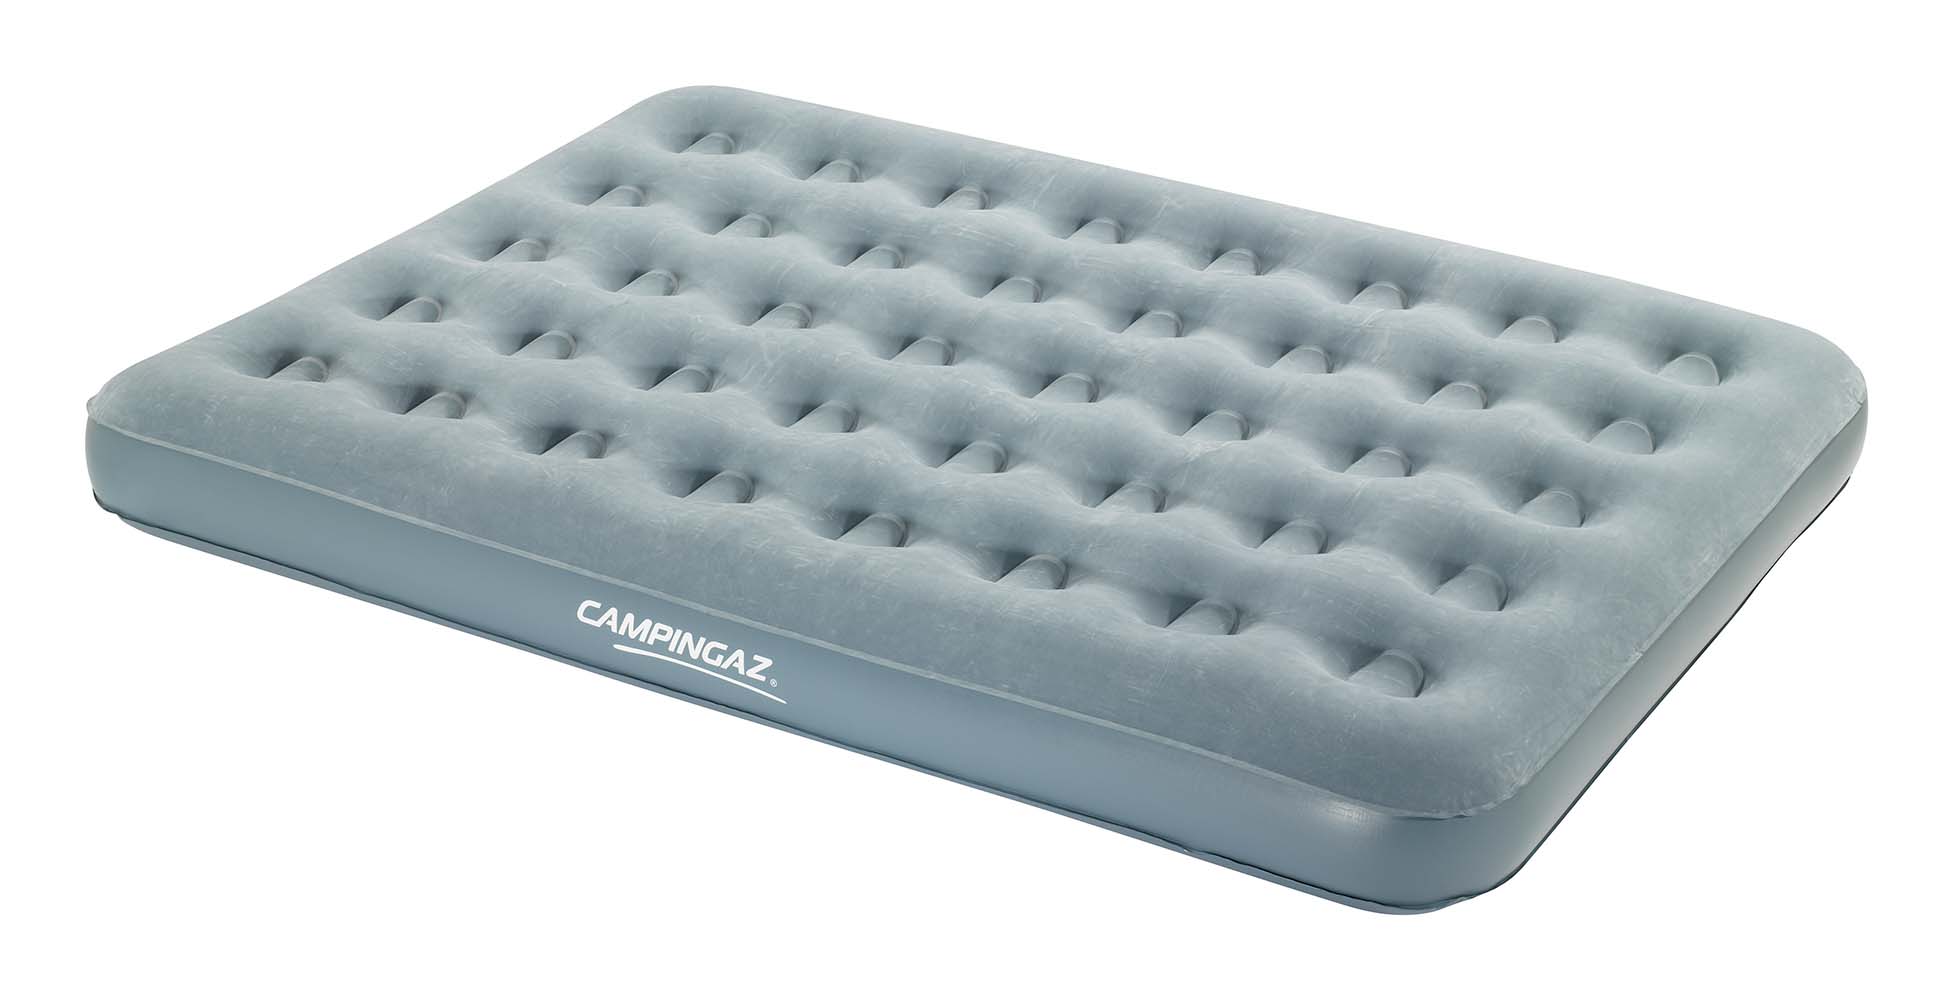 8821960 A comfortable double air mattress. Suitable for indoor and outdoor use. Made of high-quality PVC without plasticisers. The air mattress therefore has a higher resistance to leaks, is extra strong, springy and environmentally friendly. In addition, the mattress features a soft top layer and a patented double valve. Delivered with a carry bag.